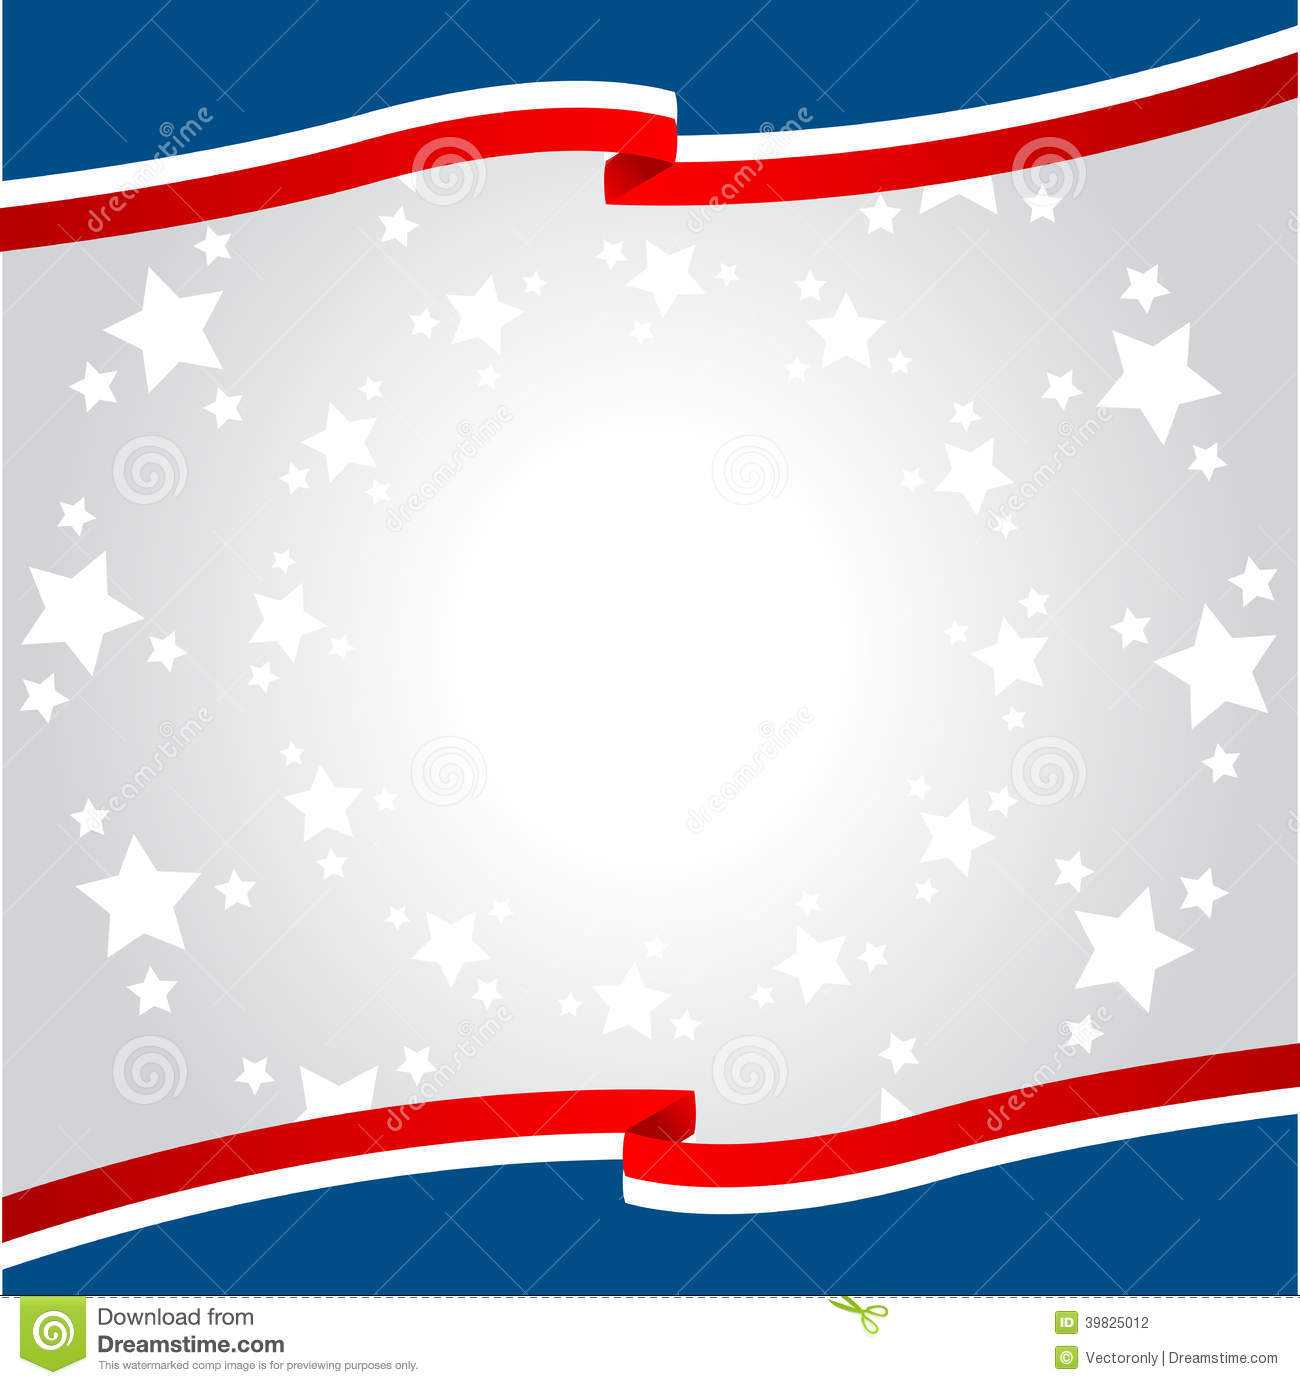 Patriotic Powerpoint Templates Free Download – Major Within Patriotic Powerpoint Template